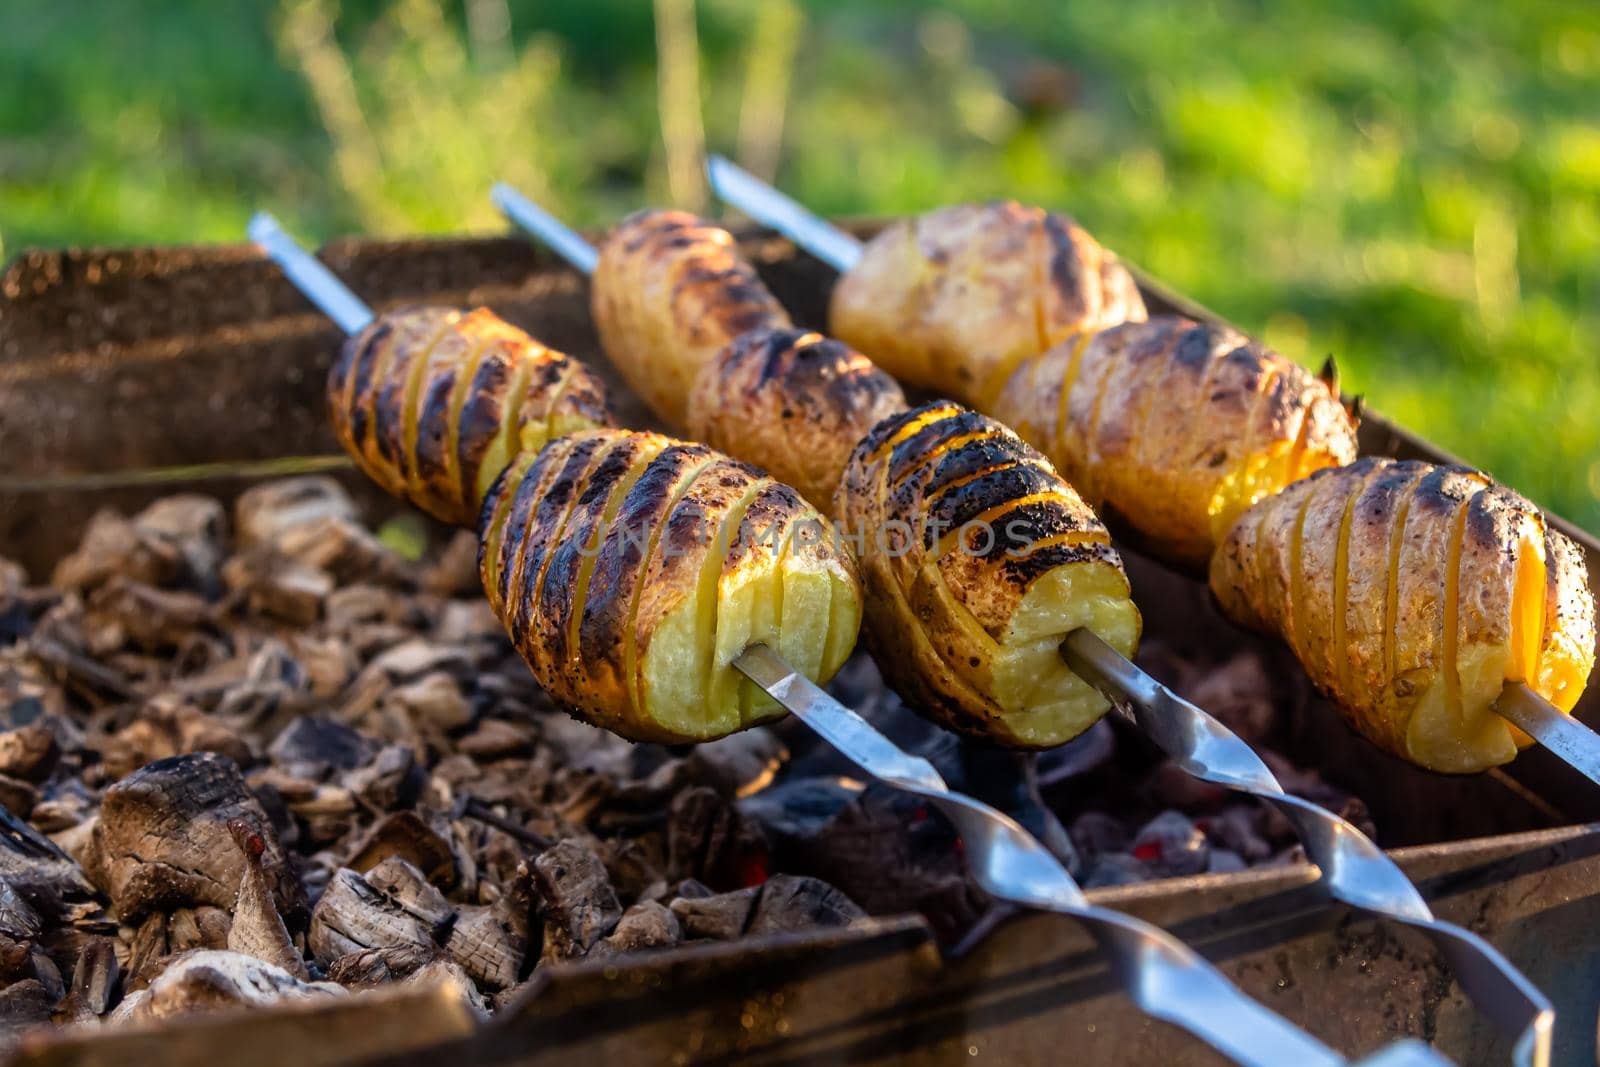 vegetarian skewers made from potatoes and mushrooms on the grill outdoors.